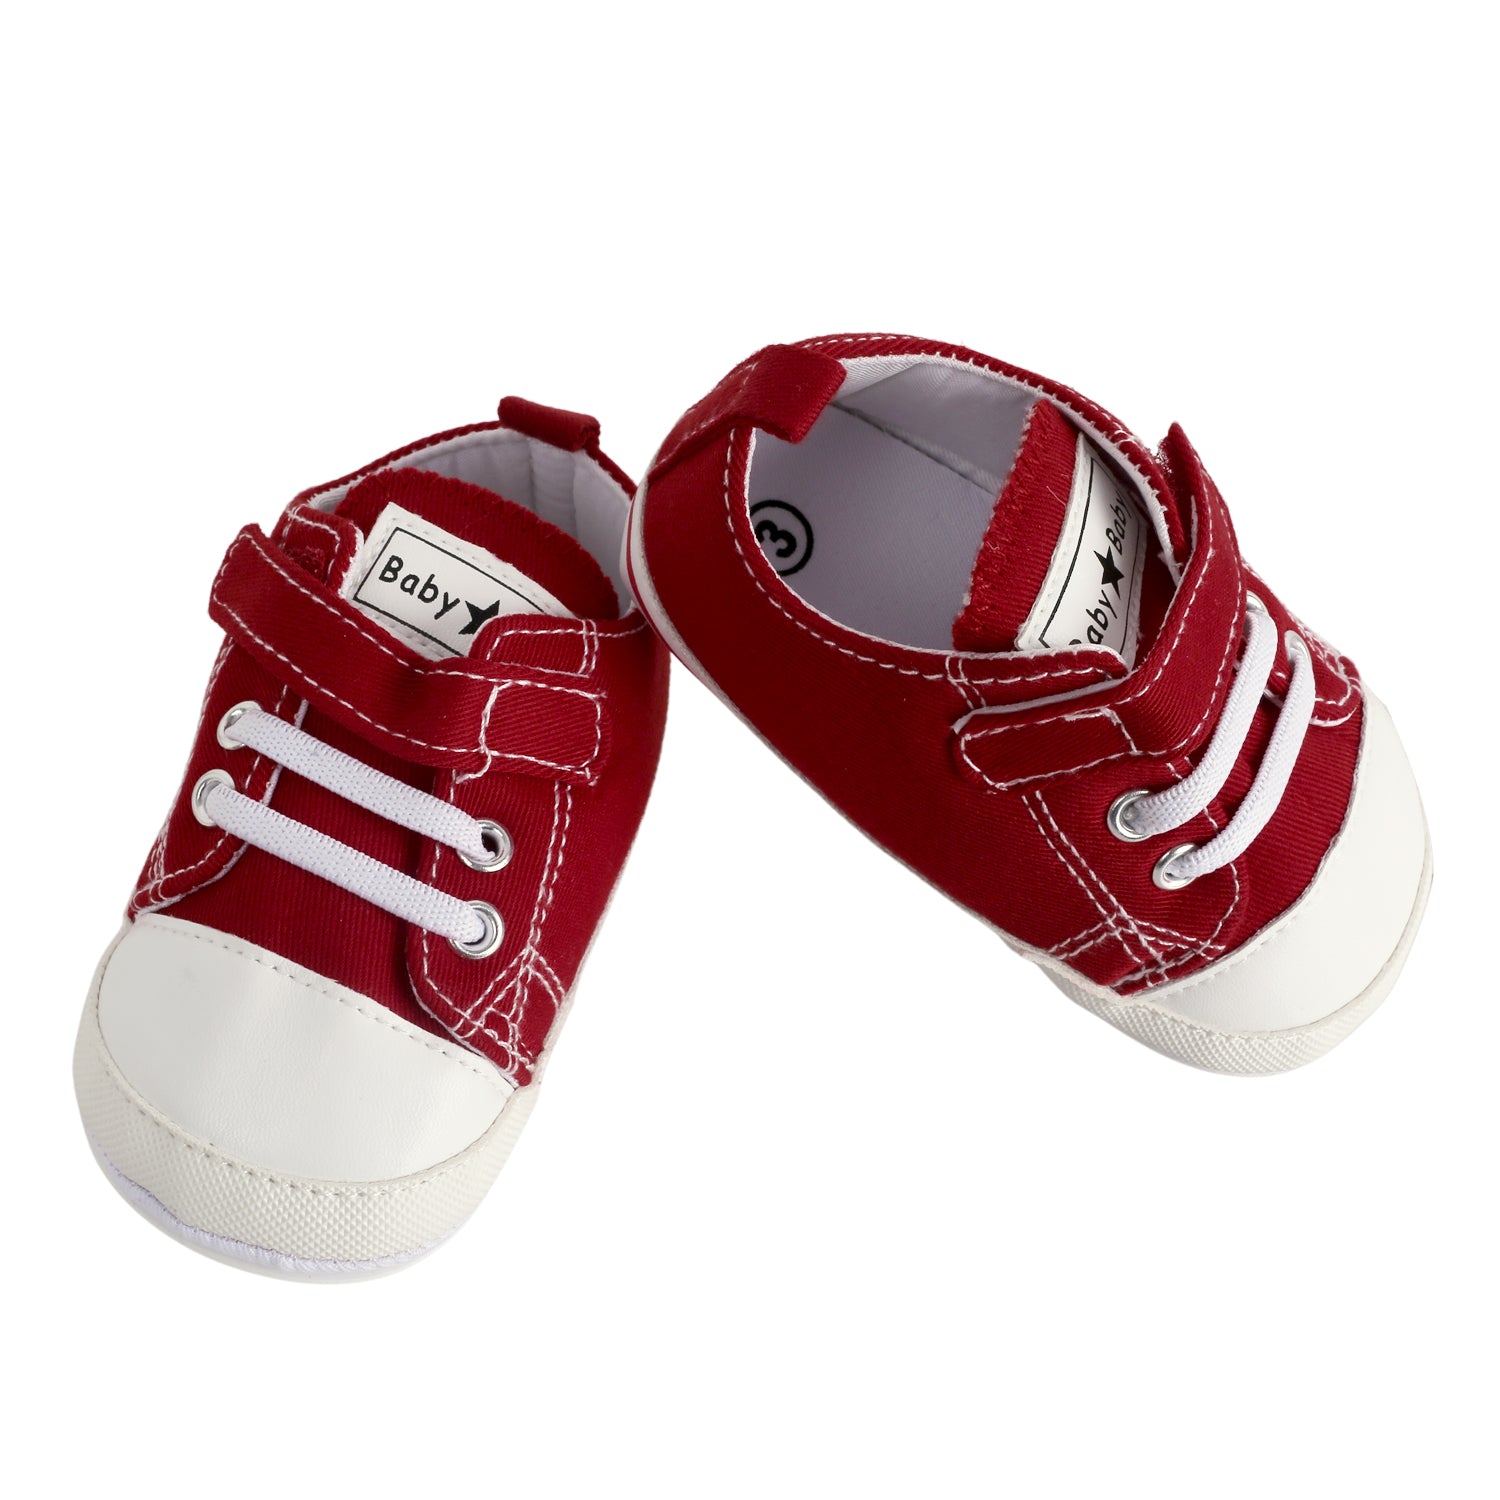 Baby Moo Red Velcro Sneakers - Baby Moo